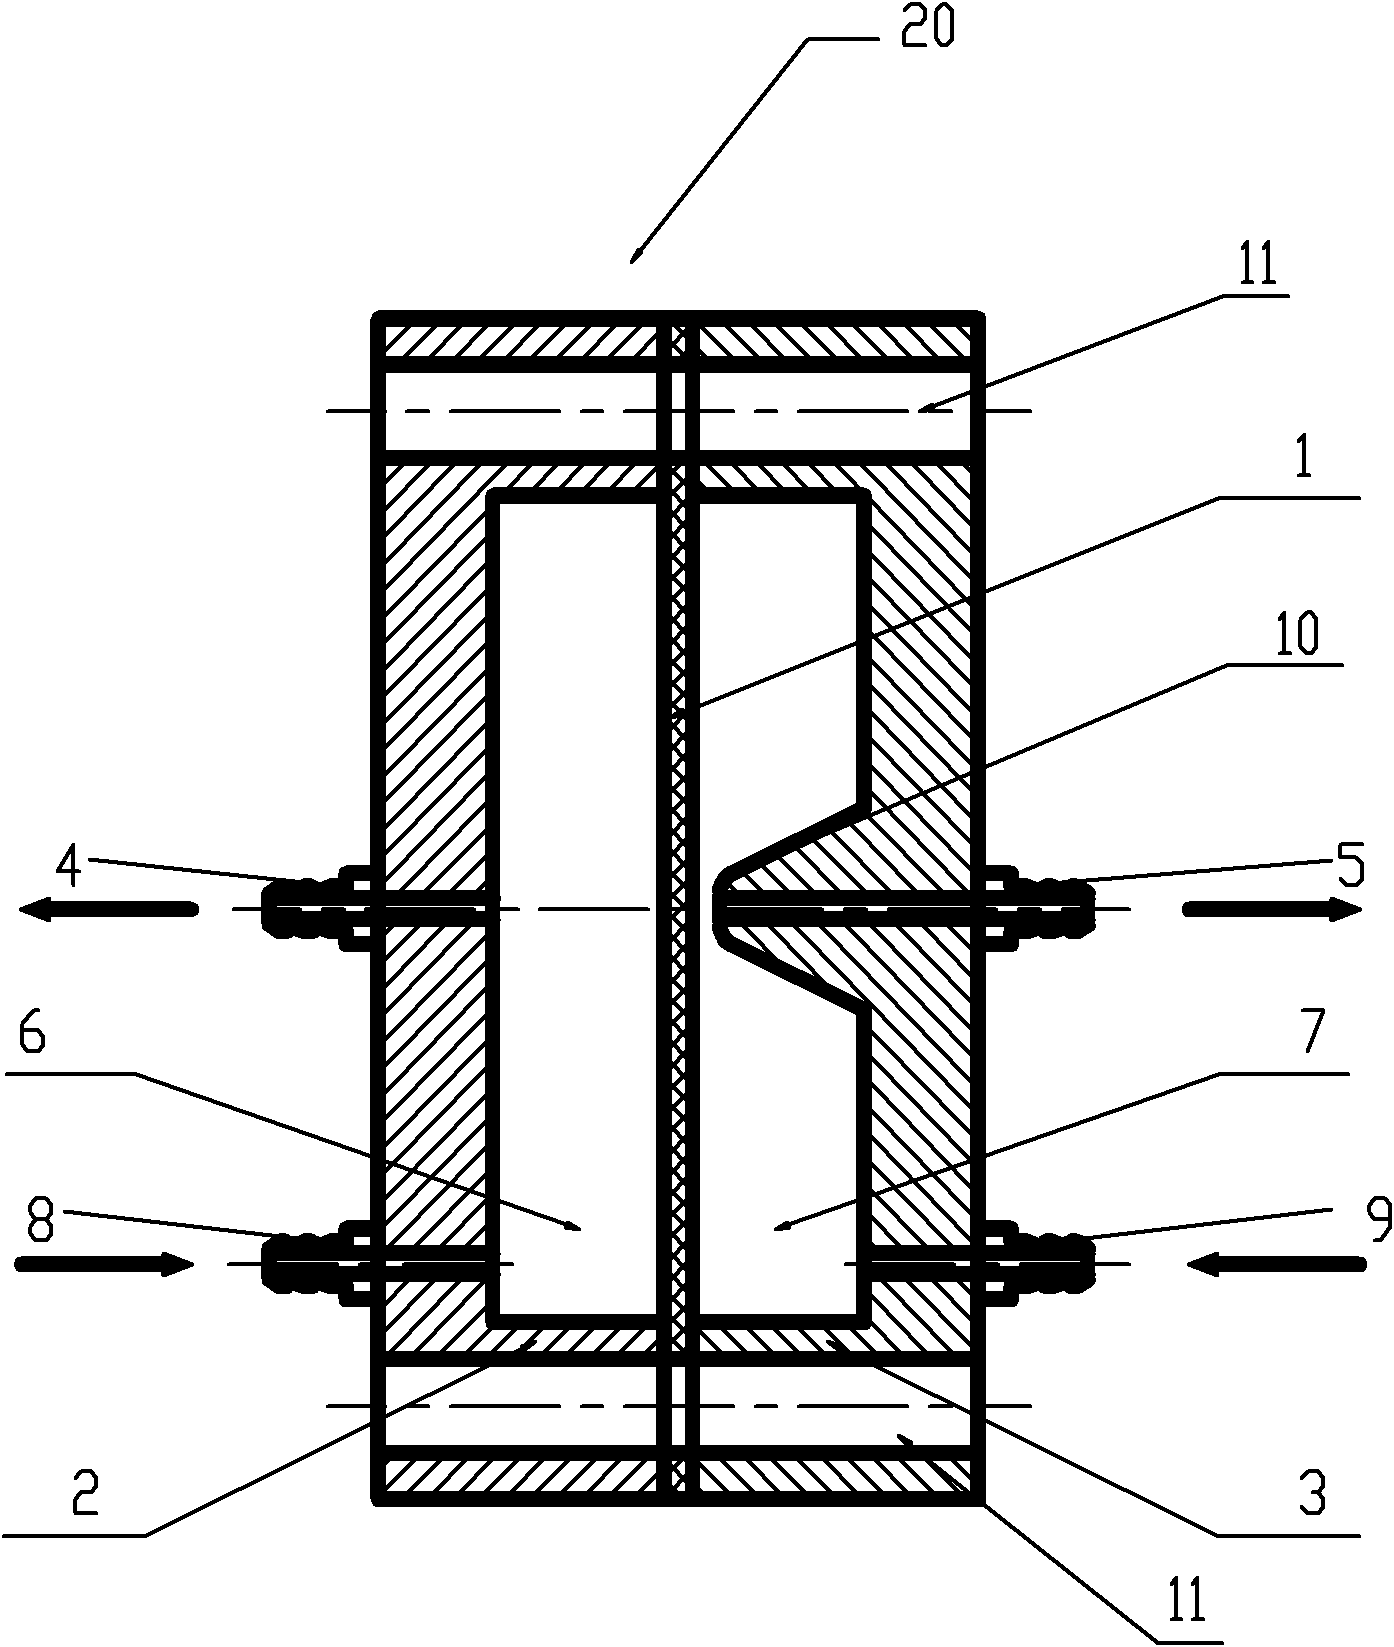 Gas equilibrium device for producing hydrogen through water electrolysis